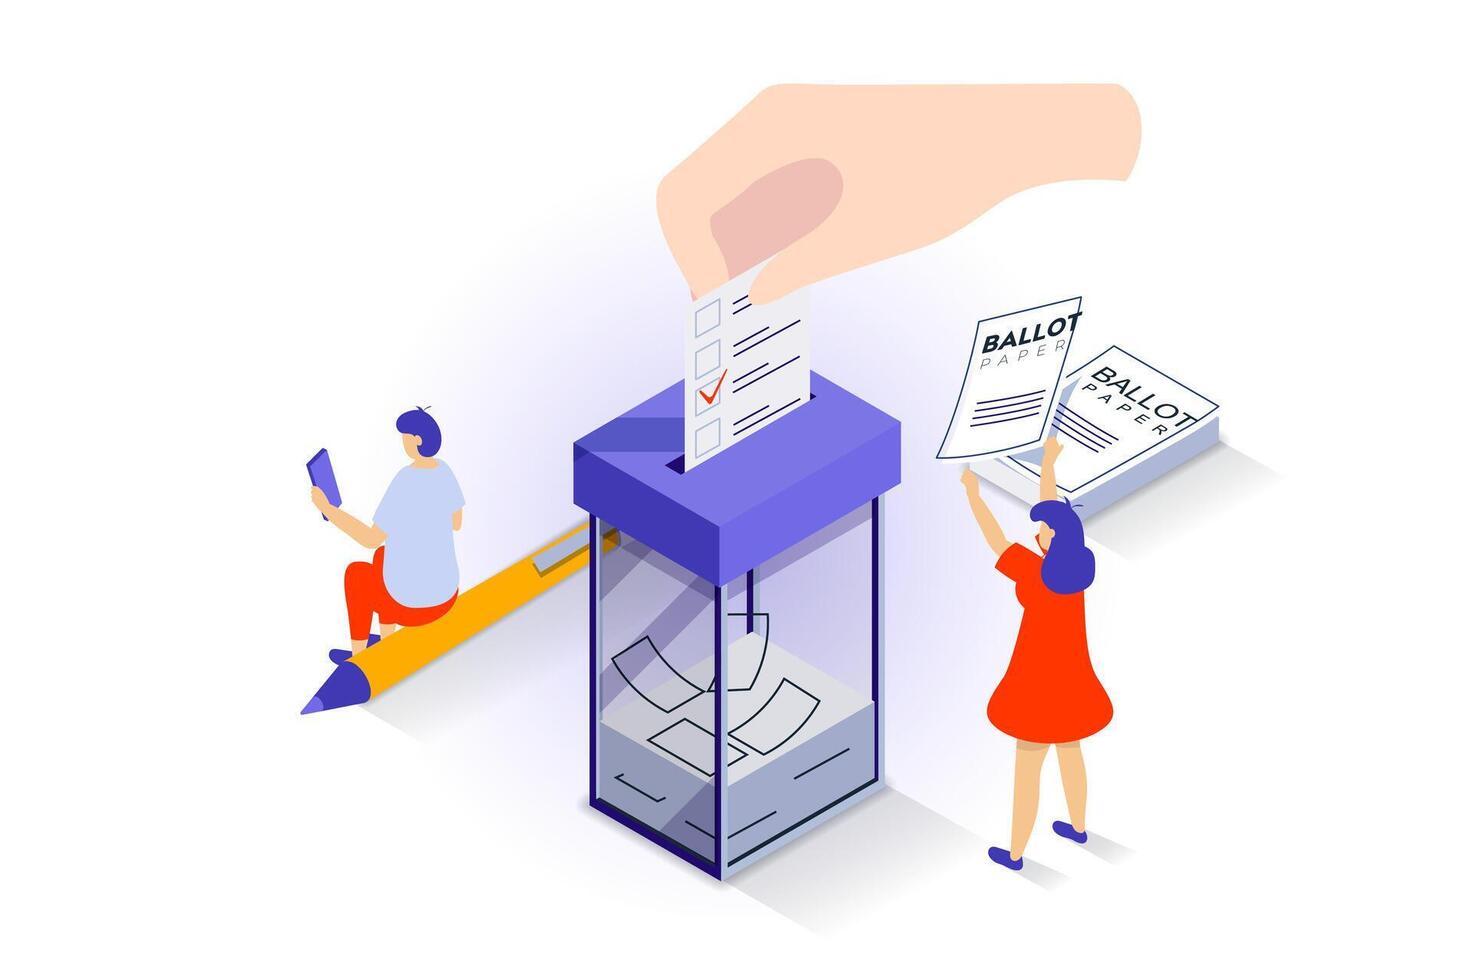 Election and voting concept in 3d isometric design. People vote in elections, putting ballot in box and choosing their political candidate. Vector illustration with isometry scene for web graphic